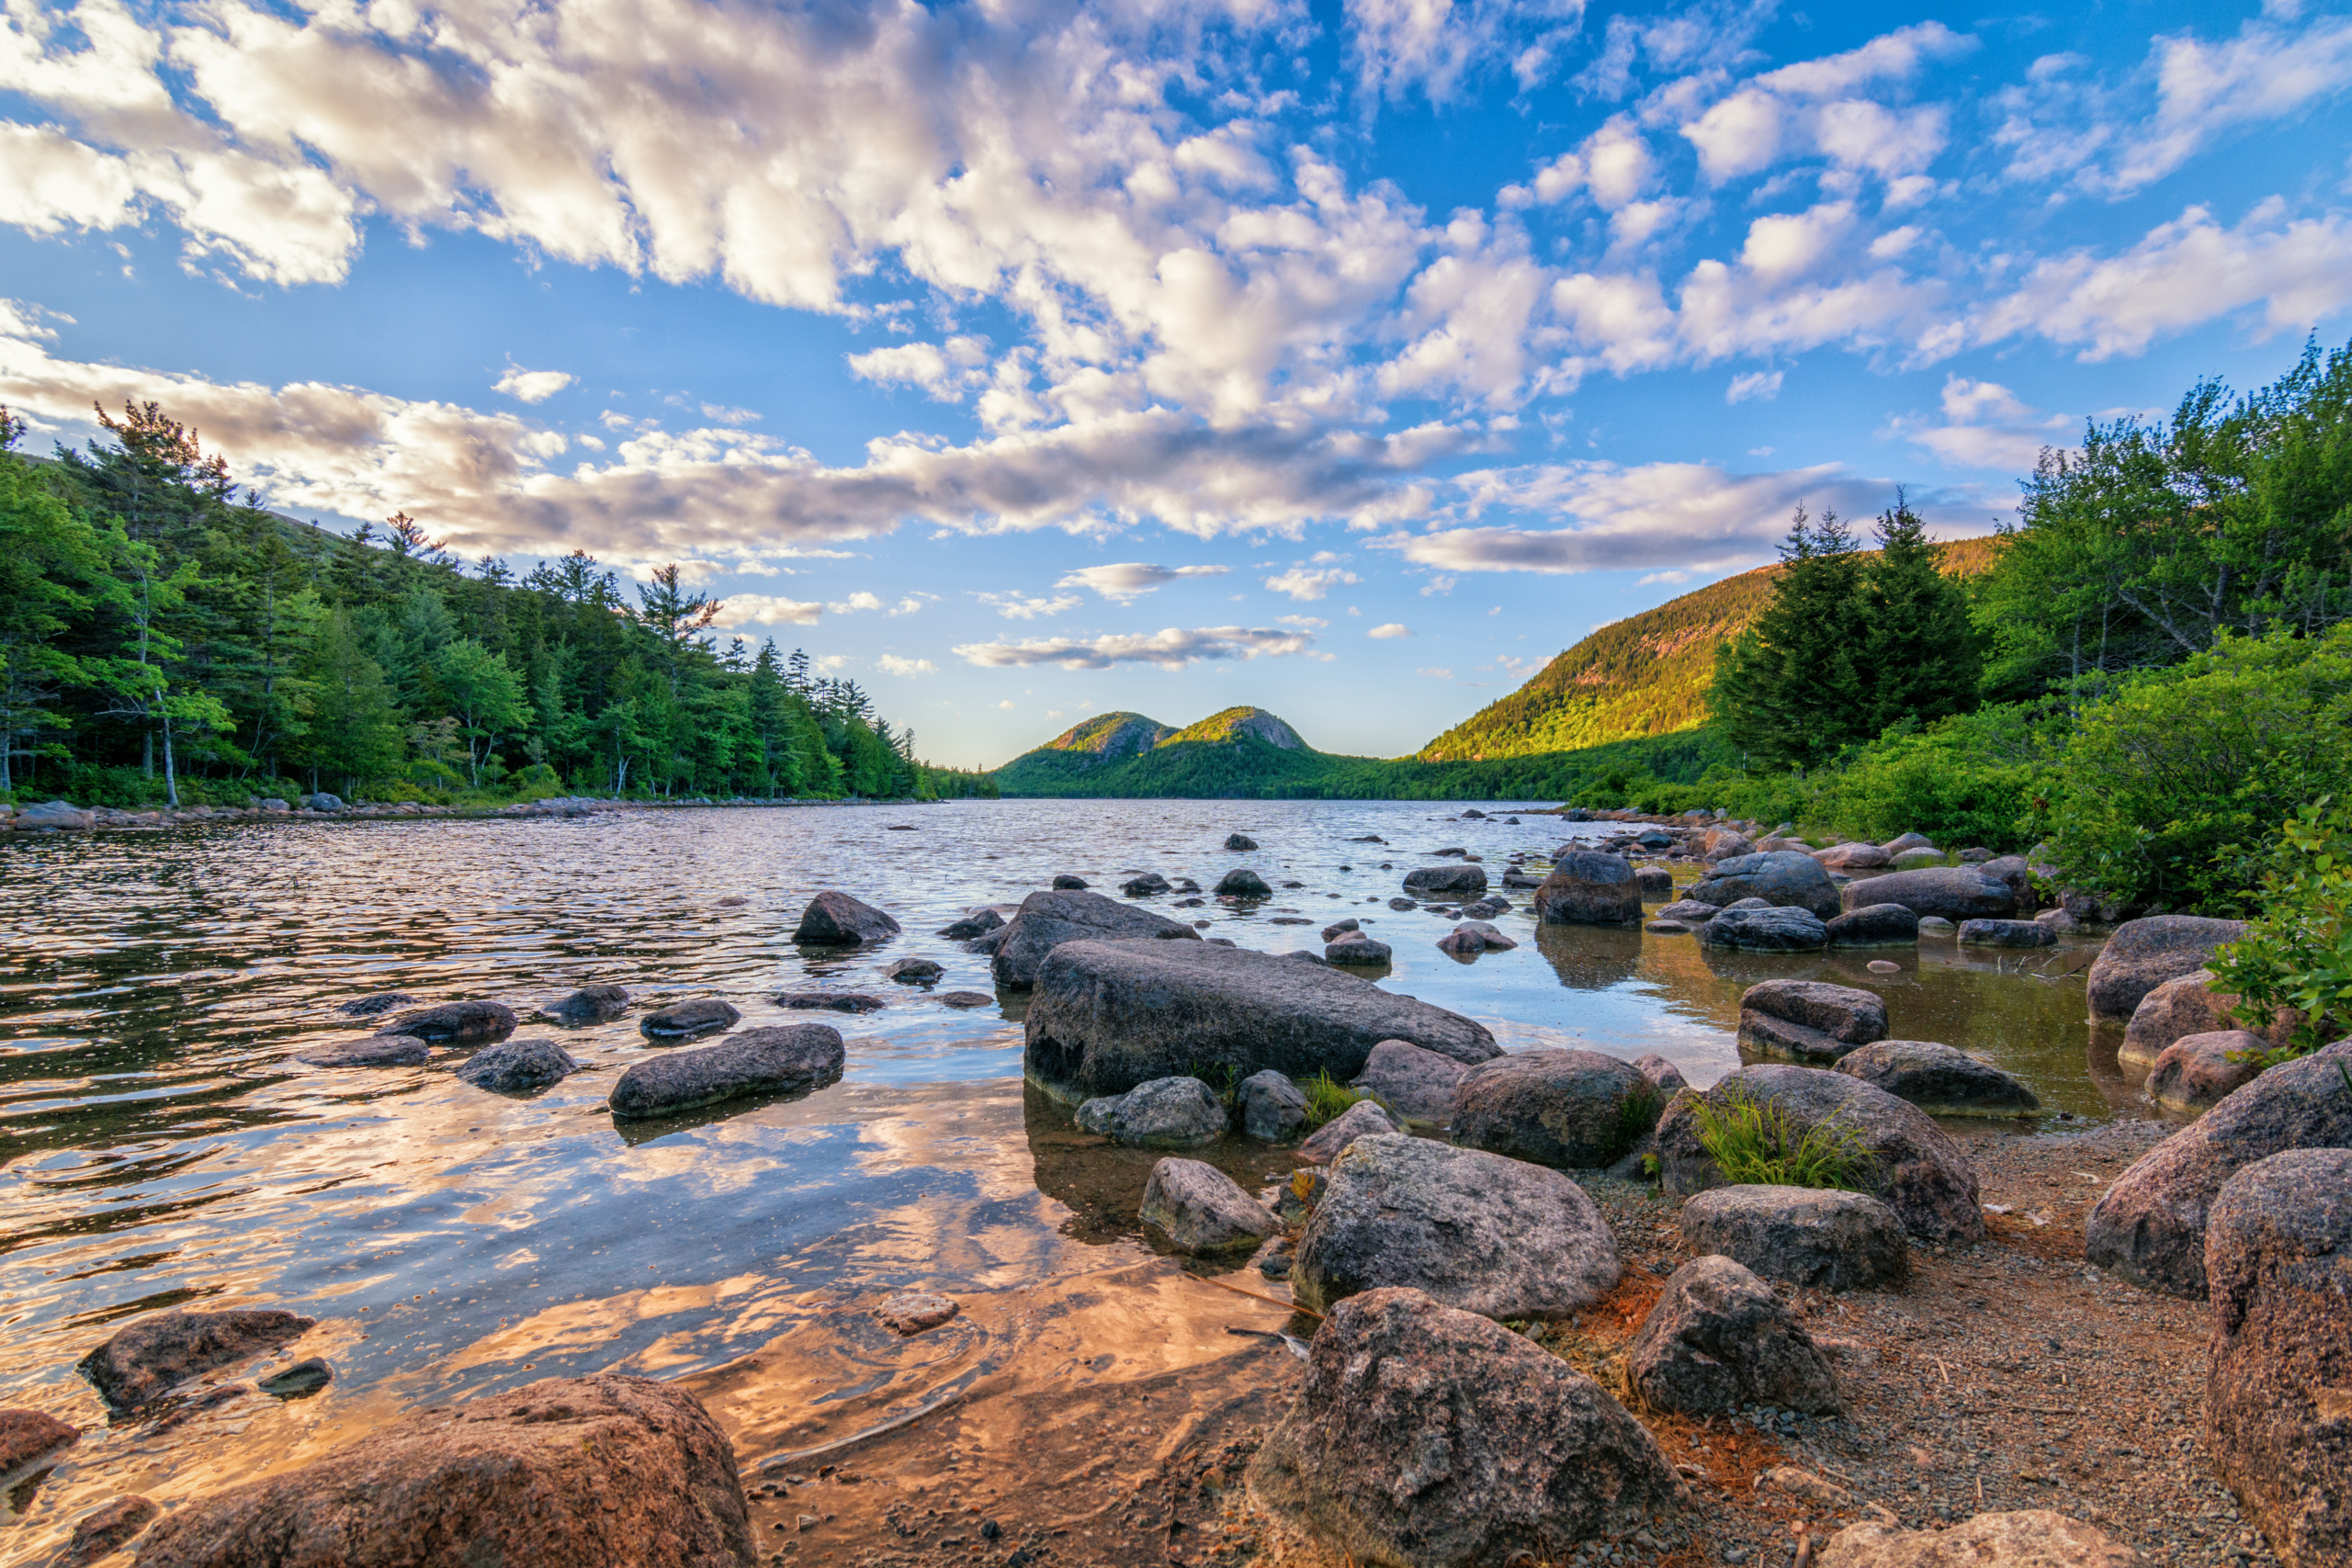 Jordan Pond at Acadia National Park one of over 425 National Parks in the United States. Daytime at Rocky shore